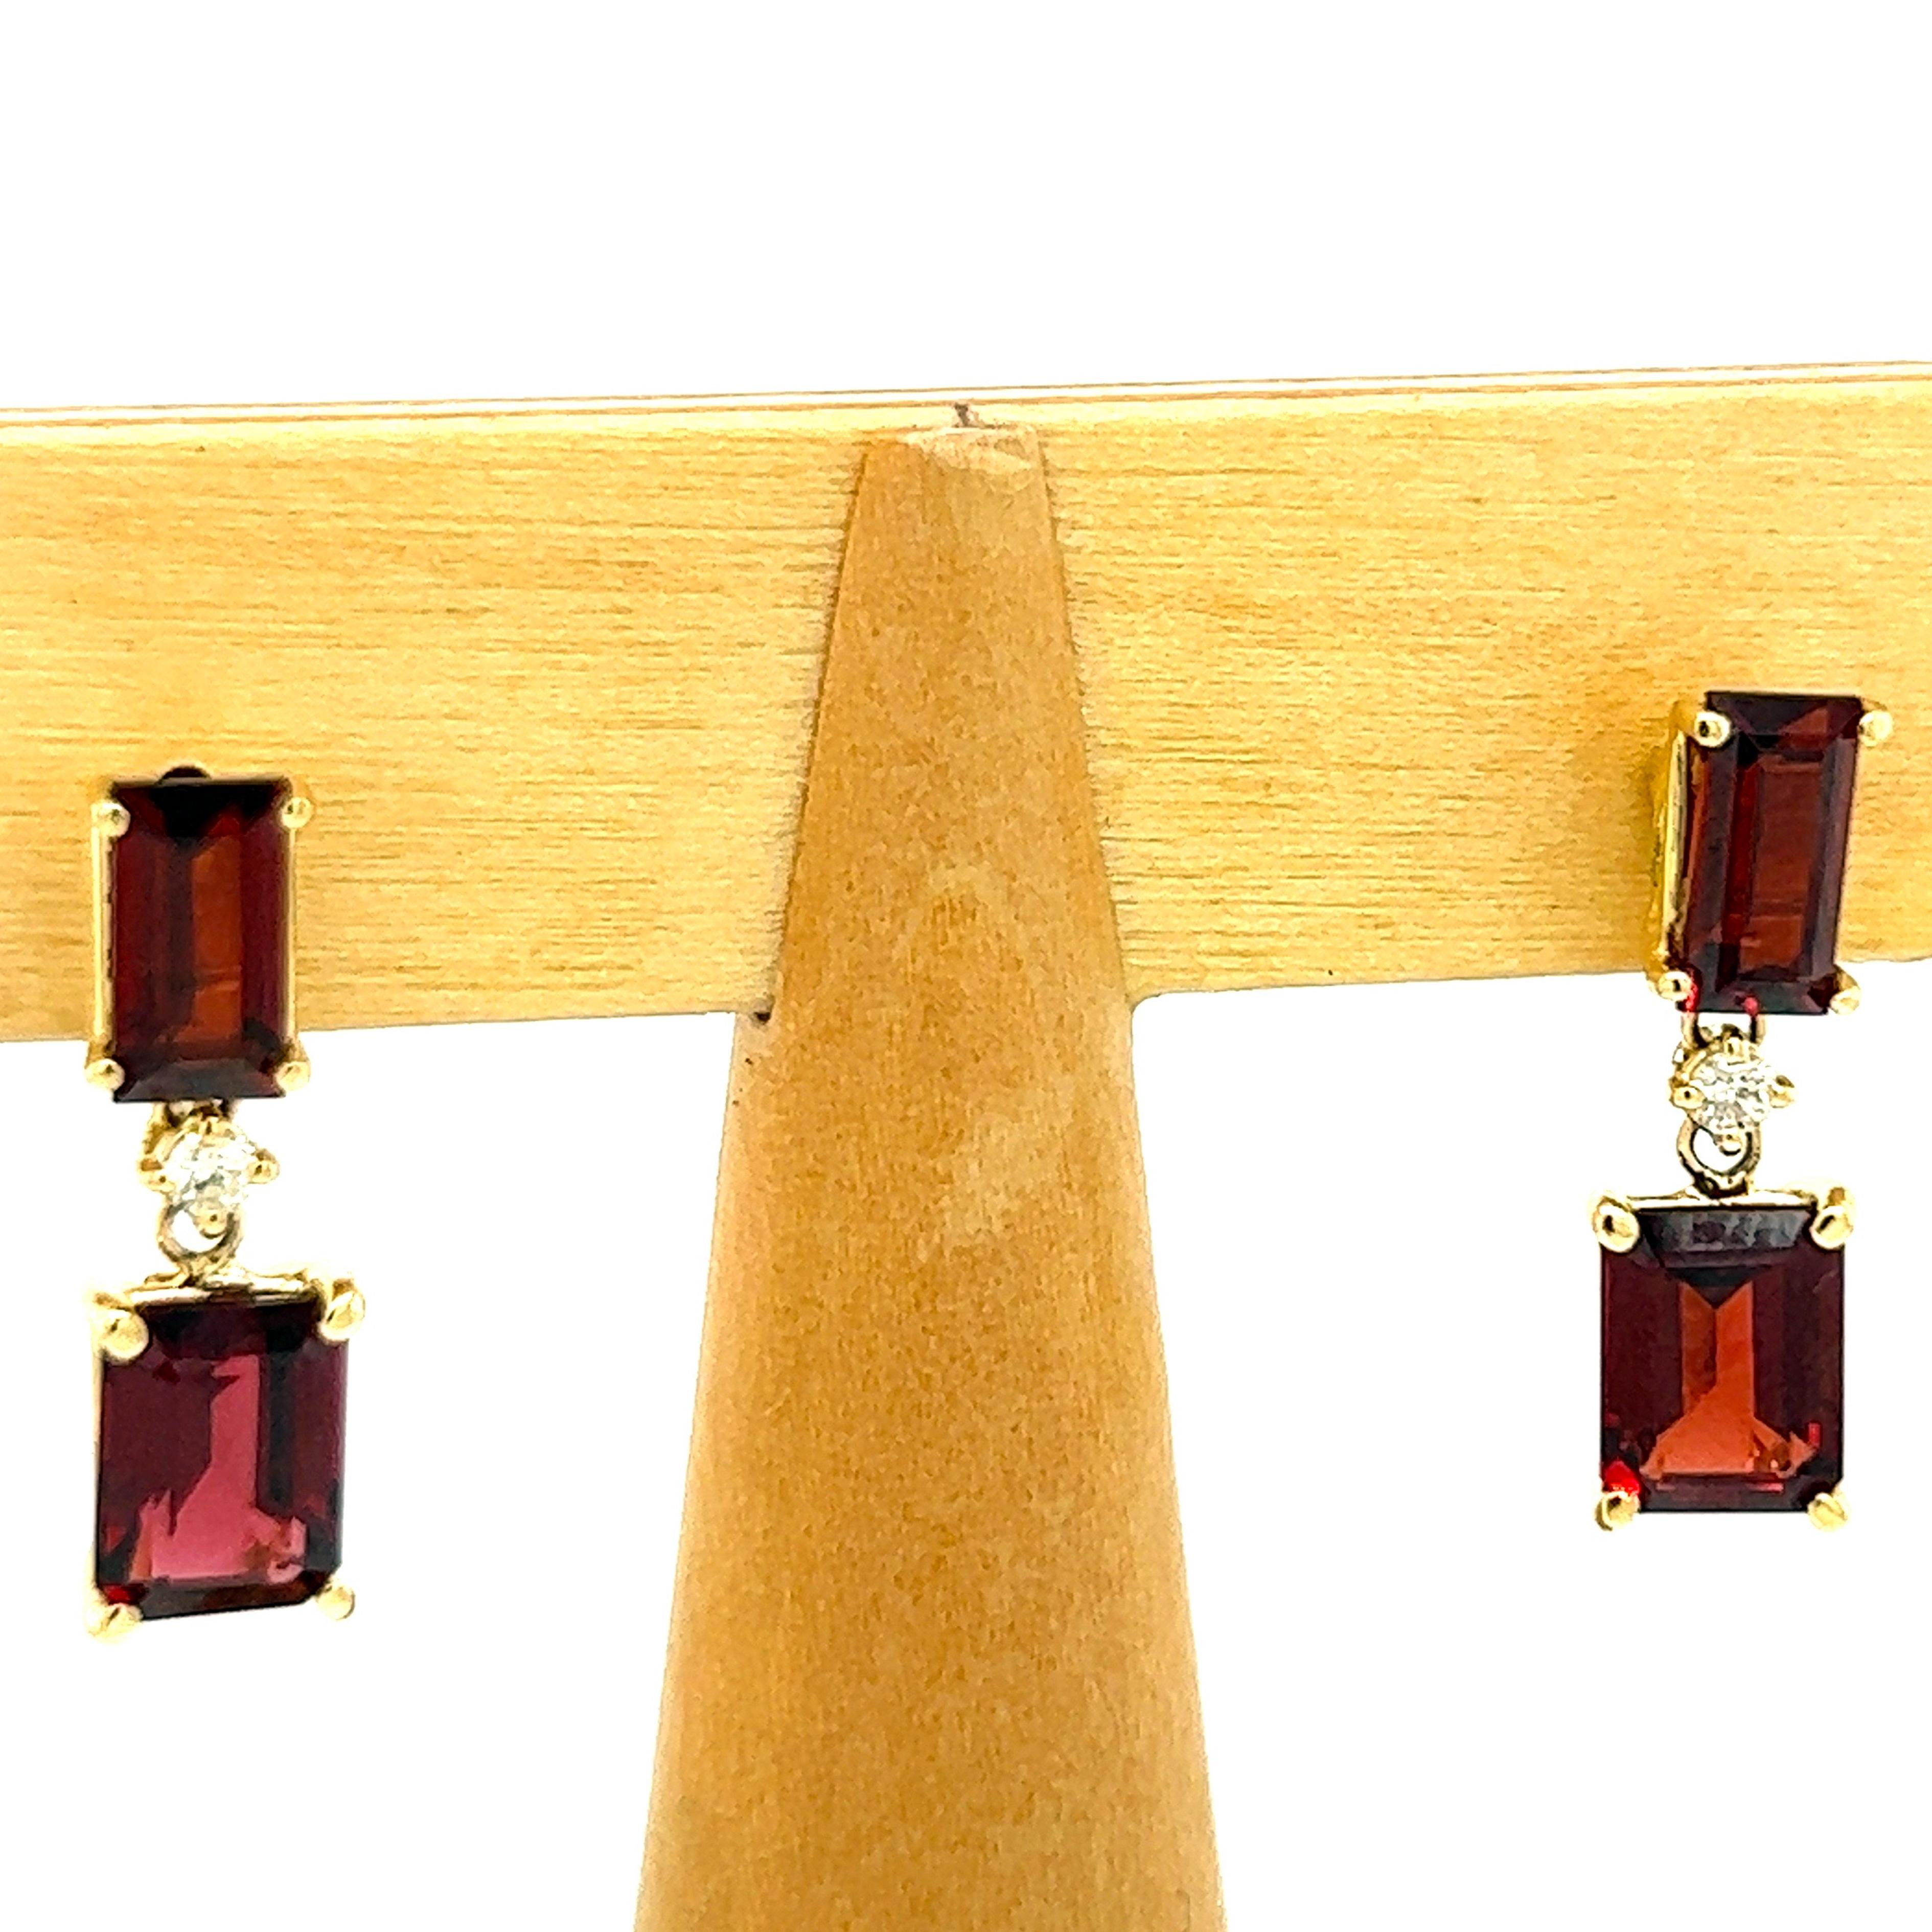 Chic yet timeless  5.79 Carat Natural Red Spessartine Garnet Emerald Cut in a 0.10Kt  White Diamond 18KT Carat Yellow Gold Setting.
These top quality stones were carefully hand inlaid in Germany.
In our smart fitted suede leather case and